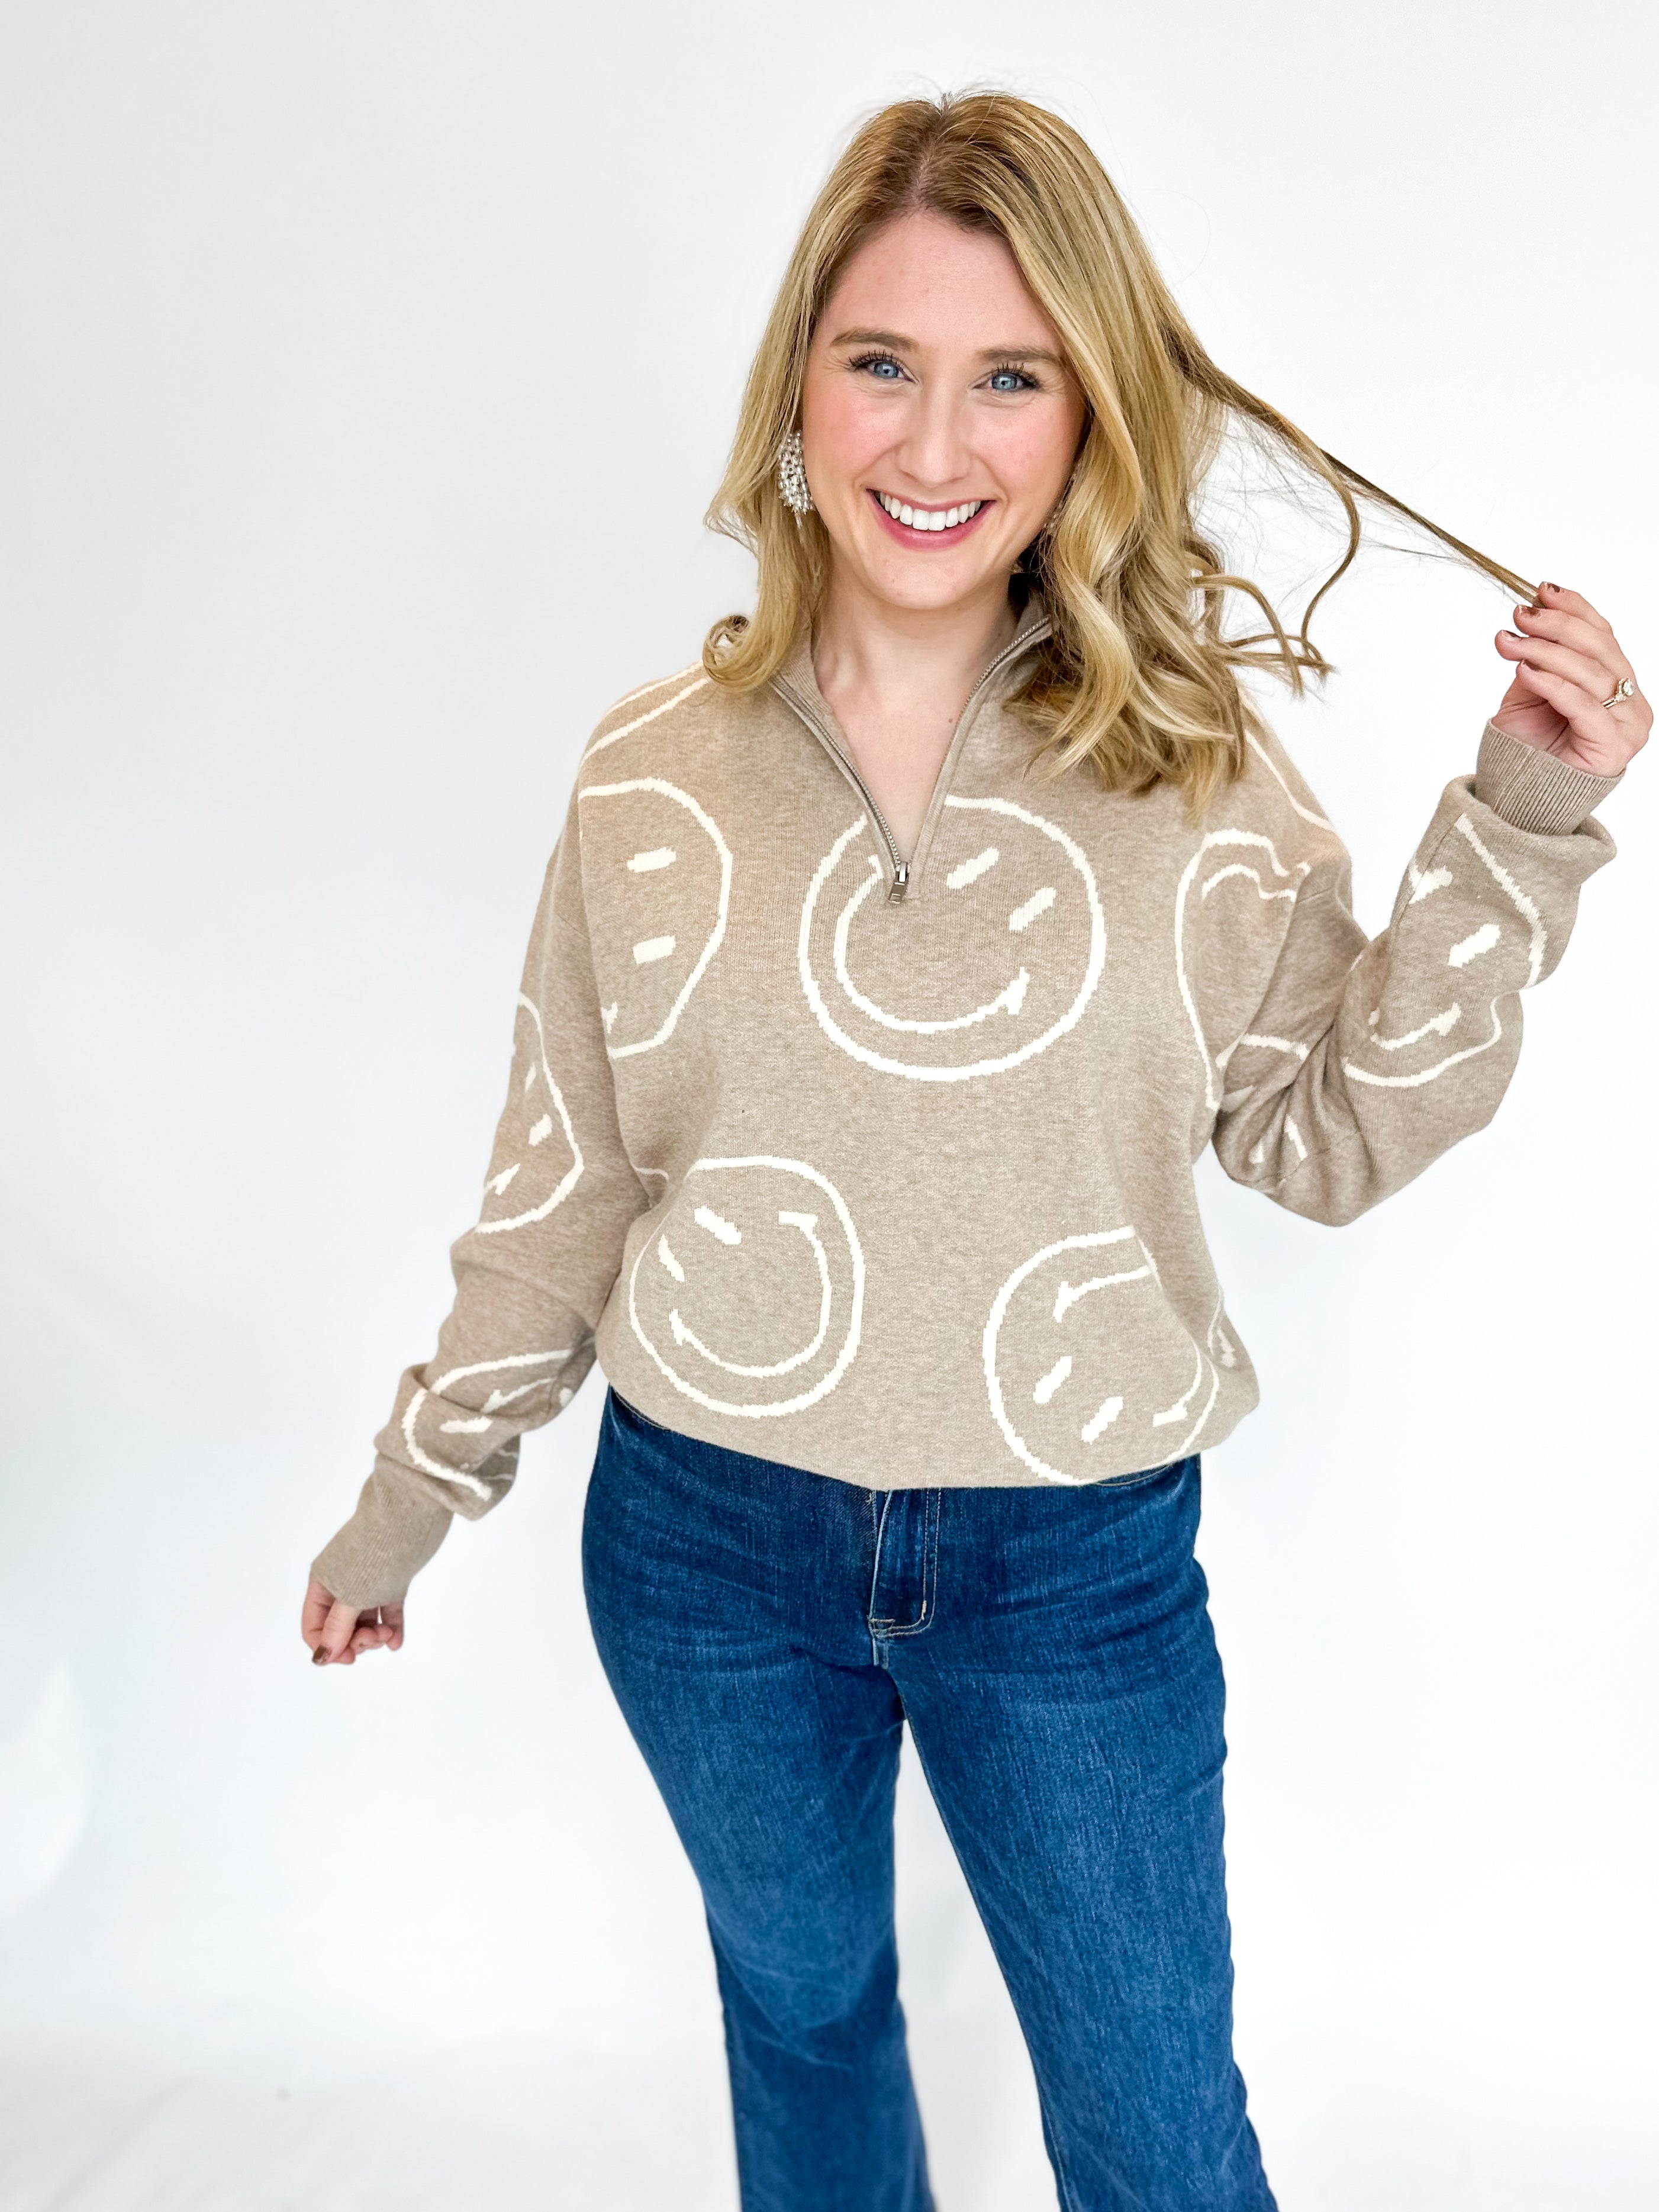 Smiley Pullover Sweater Top-230 Sweaters/Cardis-GILLI CLOTHING-July & June Women's Fashion Boutique Located in San Antonio, Texas